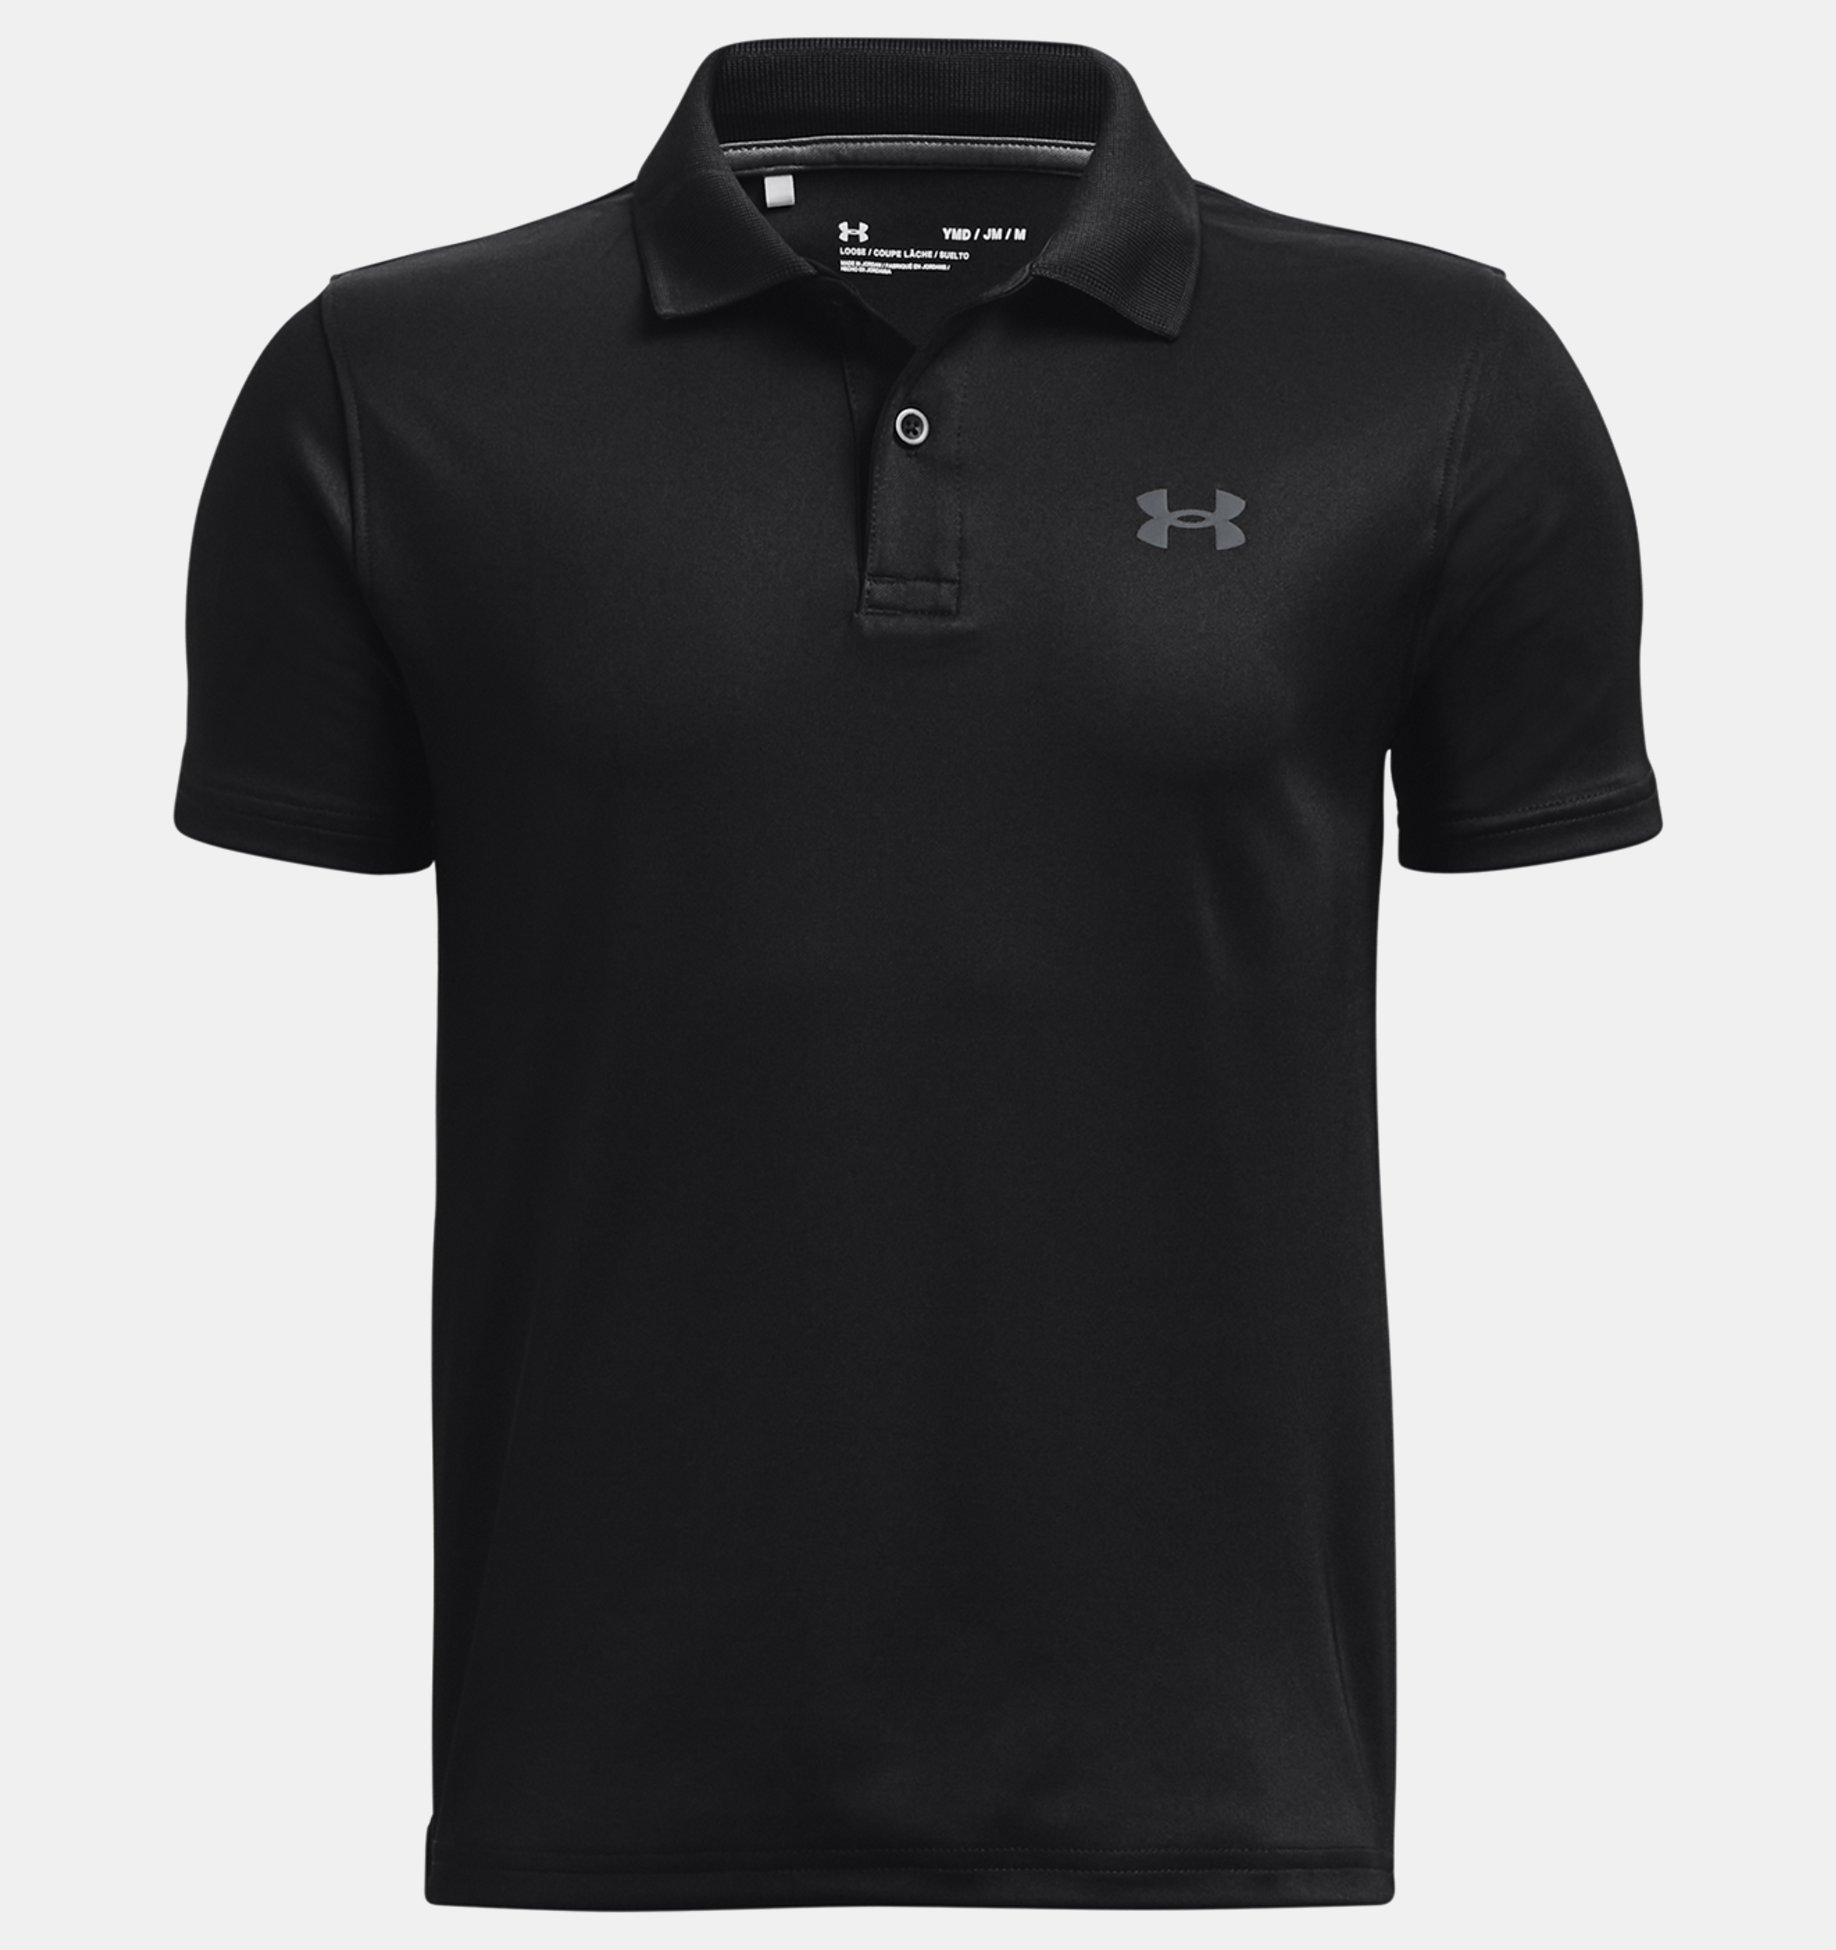 Under Armour Memorial Day Sale: Up to 50% off + an Extra 30% off on Sale Styles